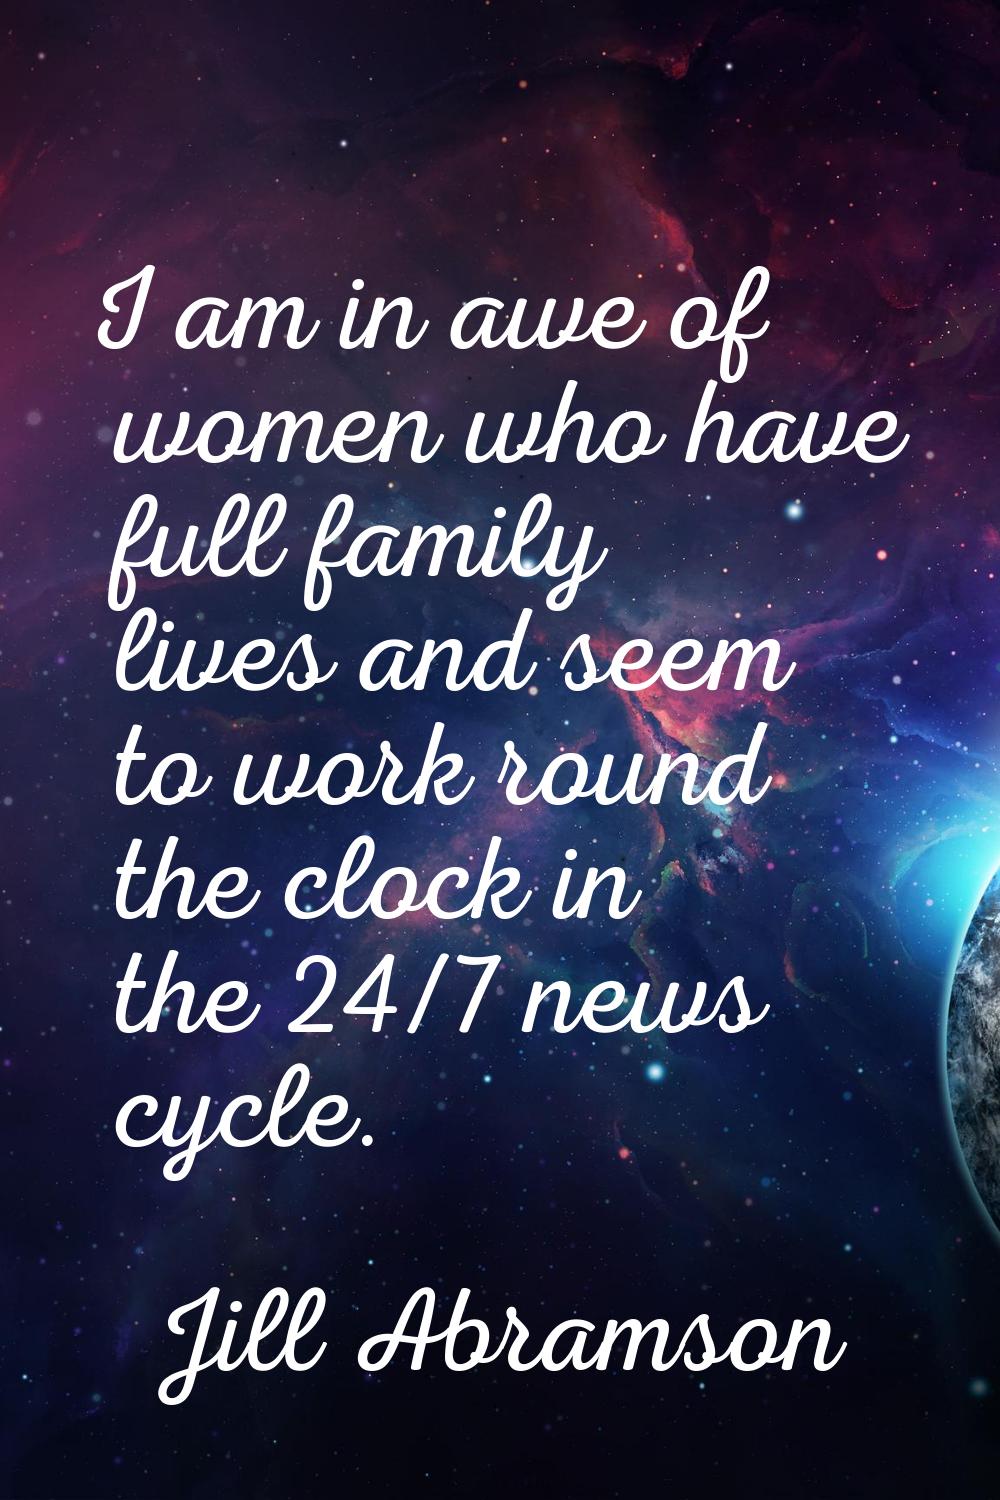 I am in awe of women who have full family lives and seem to work round the clock in the 24/7 news c